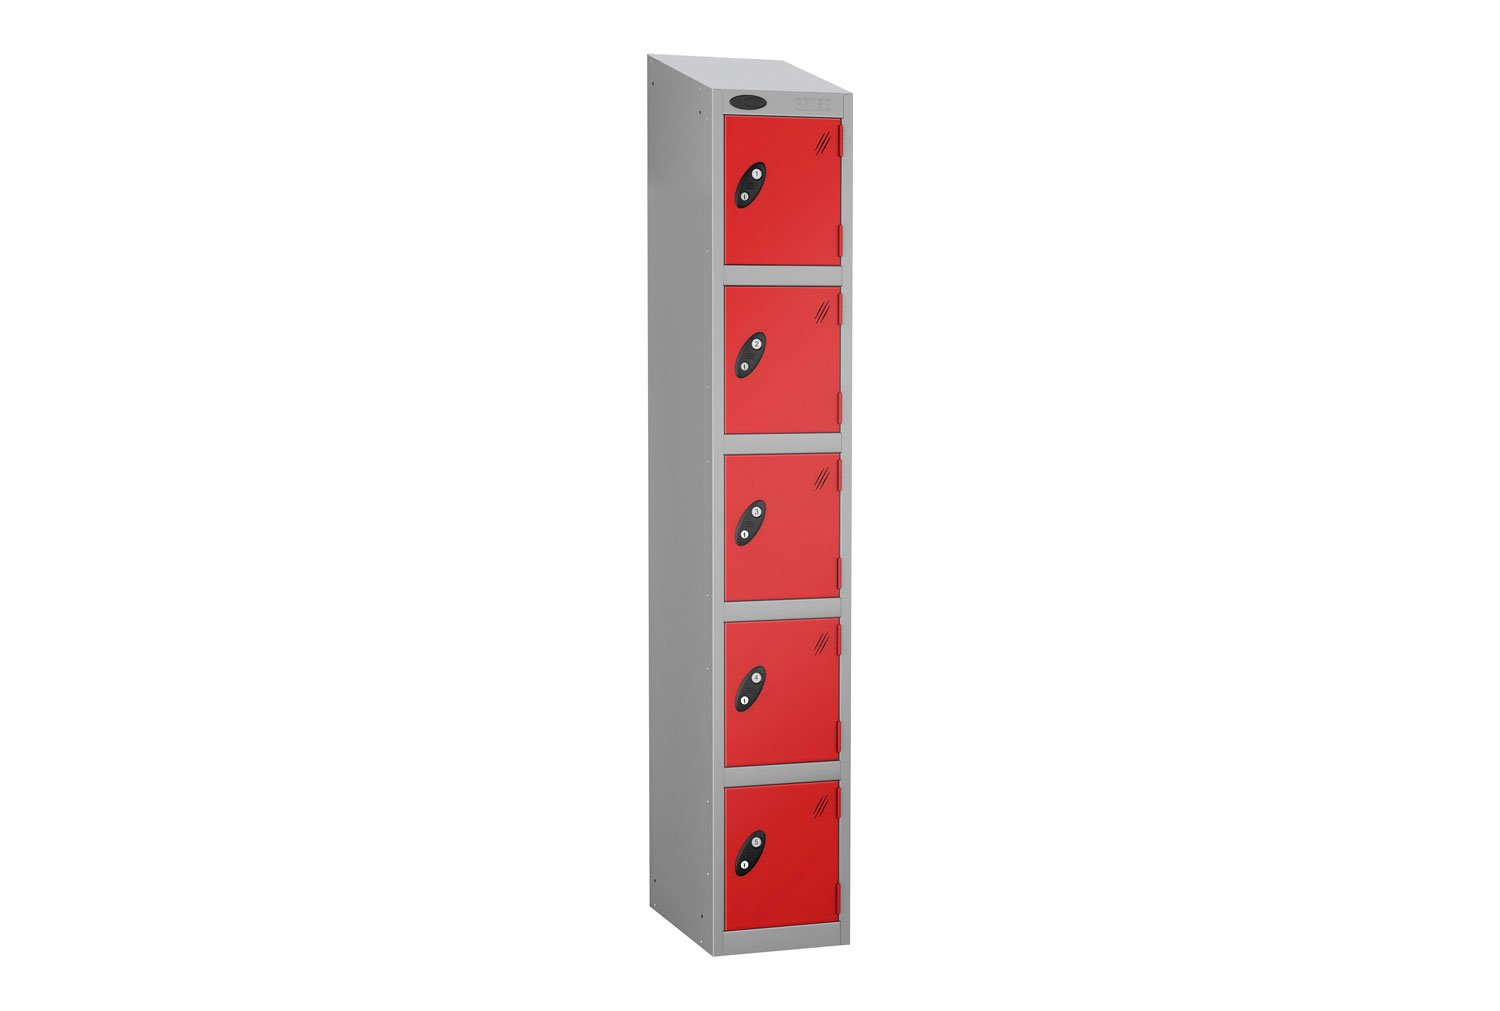 Probe Everyday 5 Door Locker With Sloping Top, 31wx46dx193h (cm), Hasp Lock, Silver Body, Red